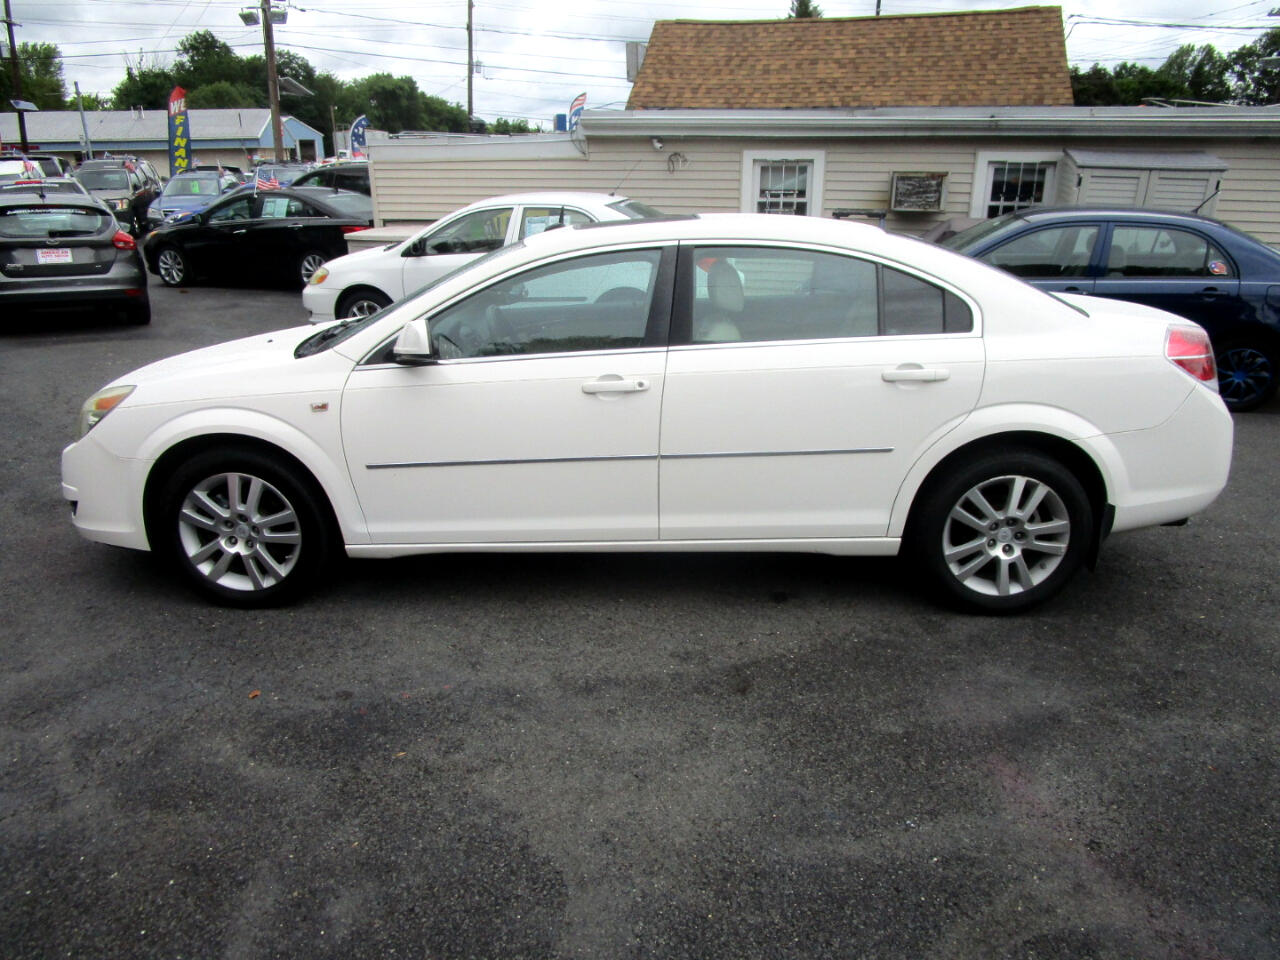 Used 2007 Saturn Aura 4dr Sdn XE for Sale in Maple Shade NJ 08052